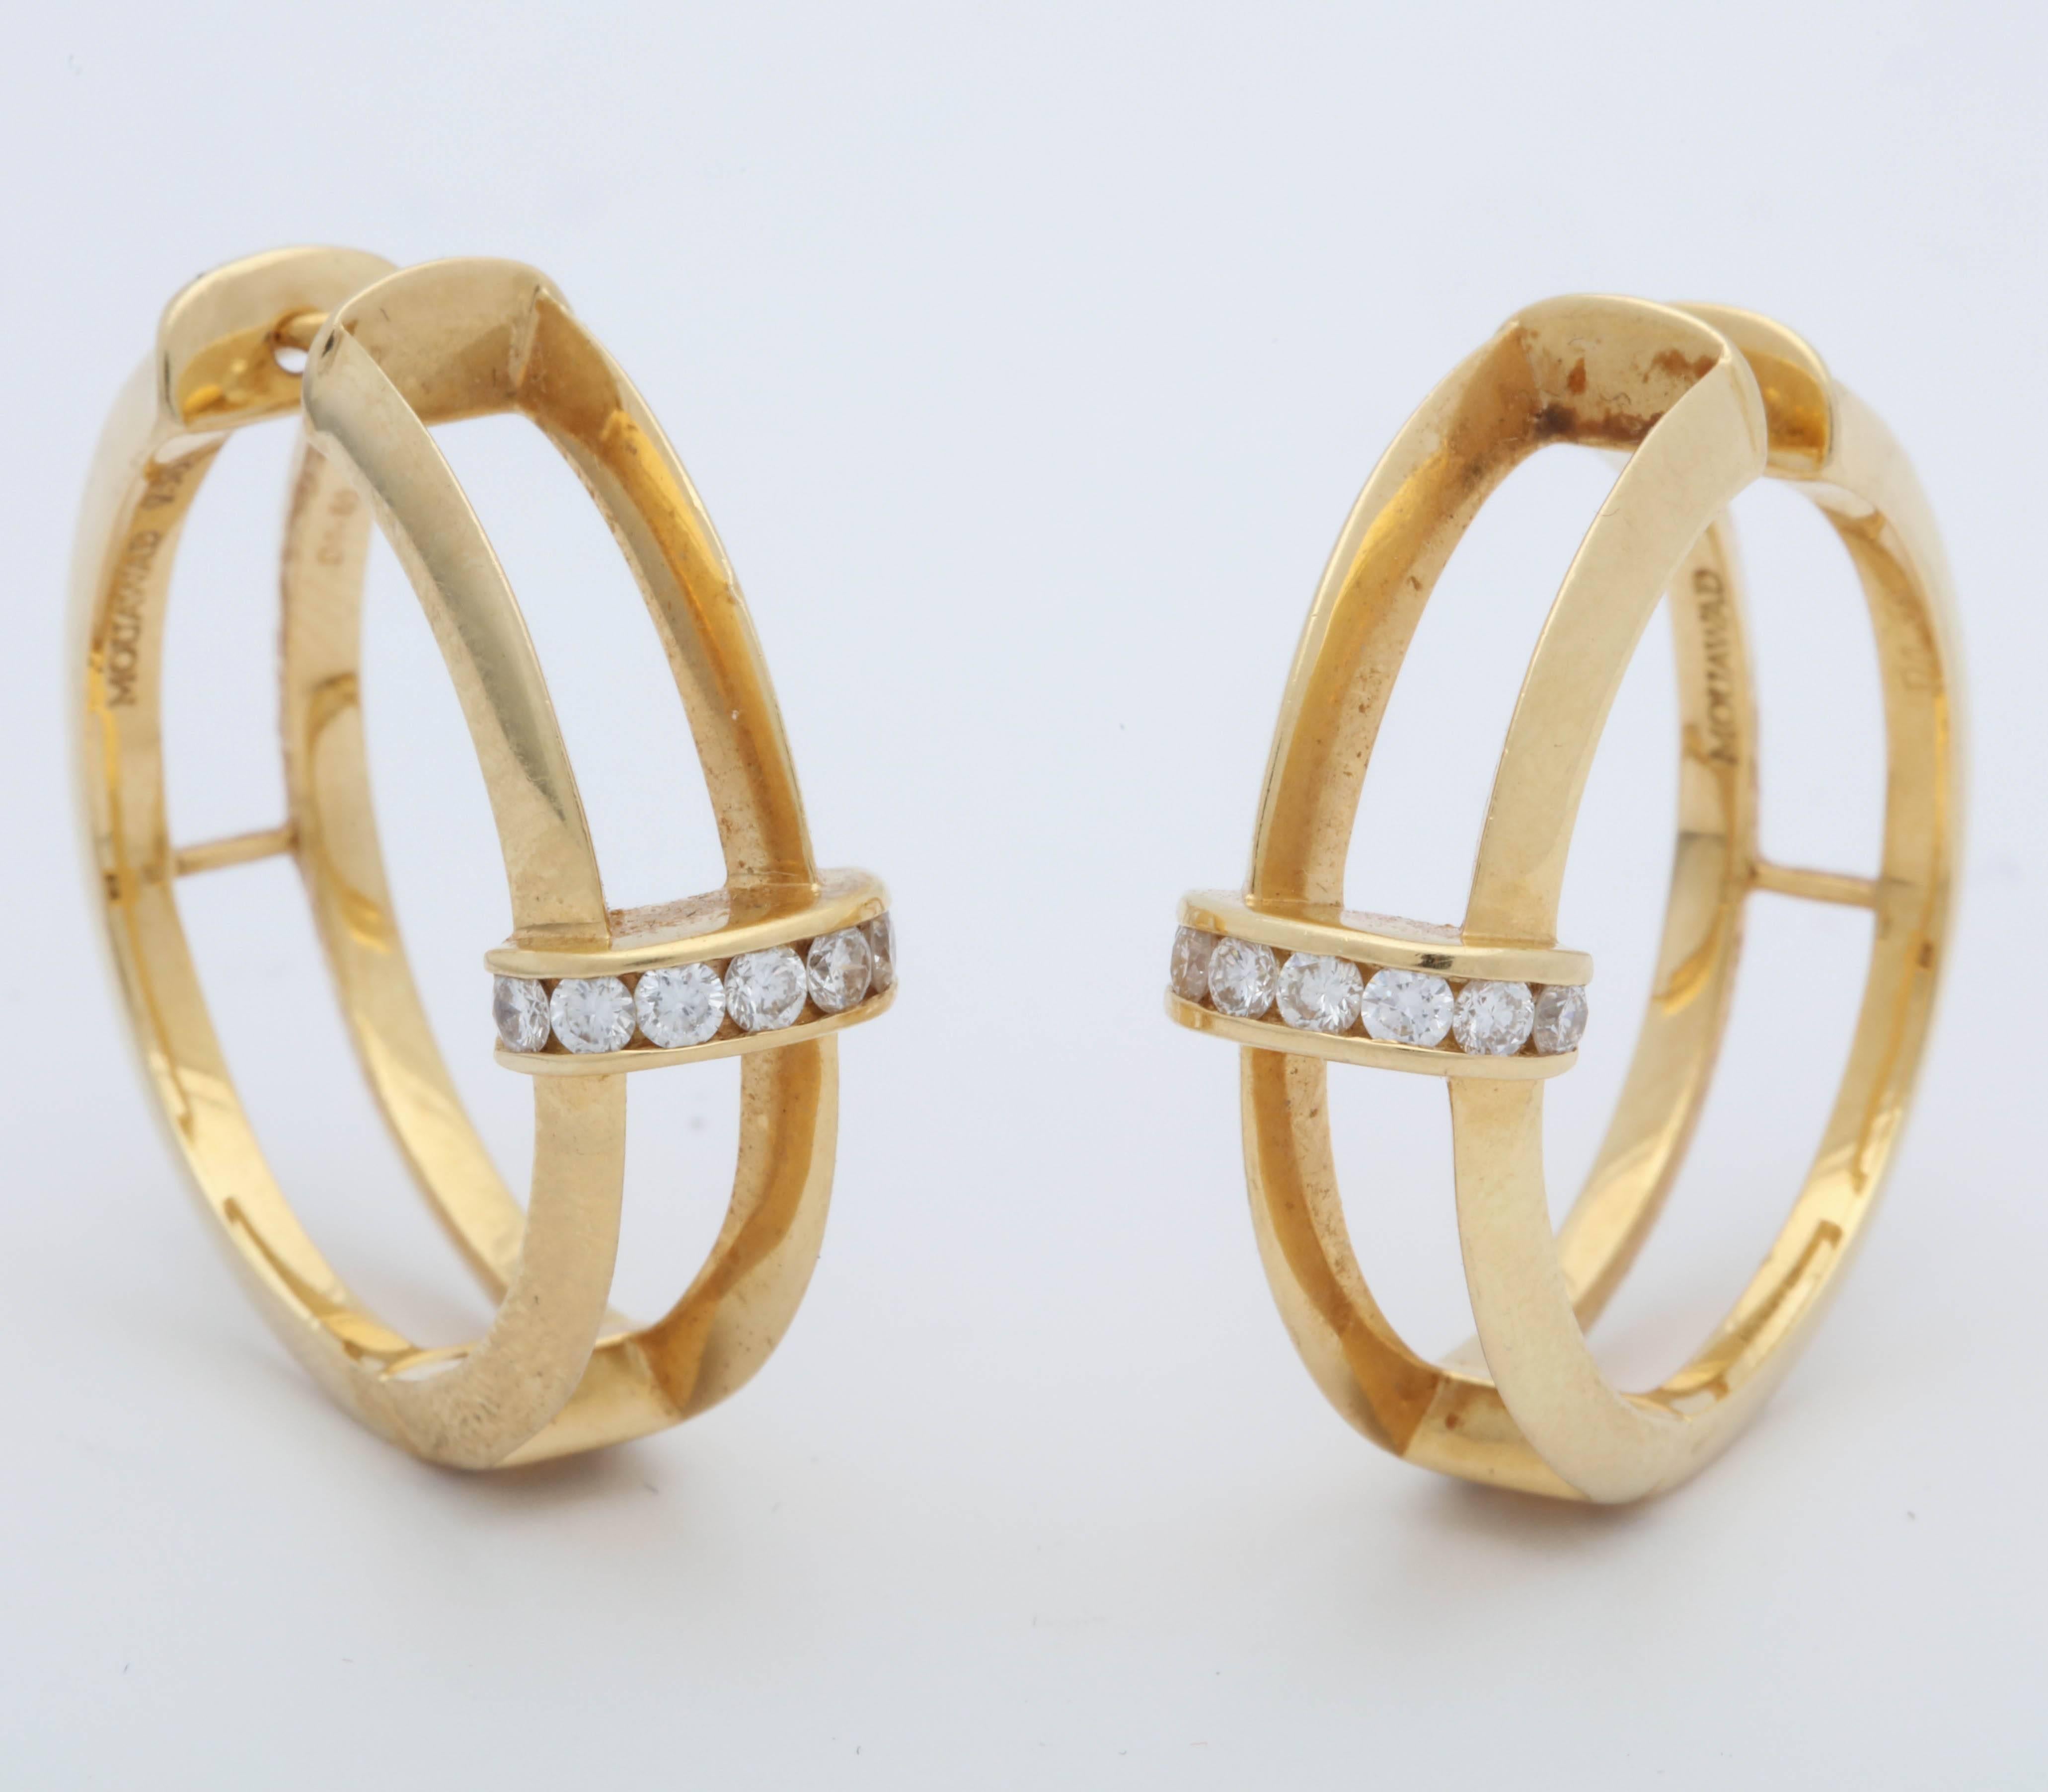 One Pair Of Ladies 18kt Yellow Gold Hoop Earrings Designed With A Knife Edged Double Bar Open Look And Embellished With 16 Full Cut Very High Quality Invisibly Set Diamonds Weighing .80 Cts Total Weight Approximately Signed By Mouawad And Made In